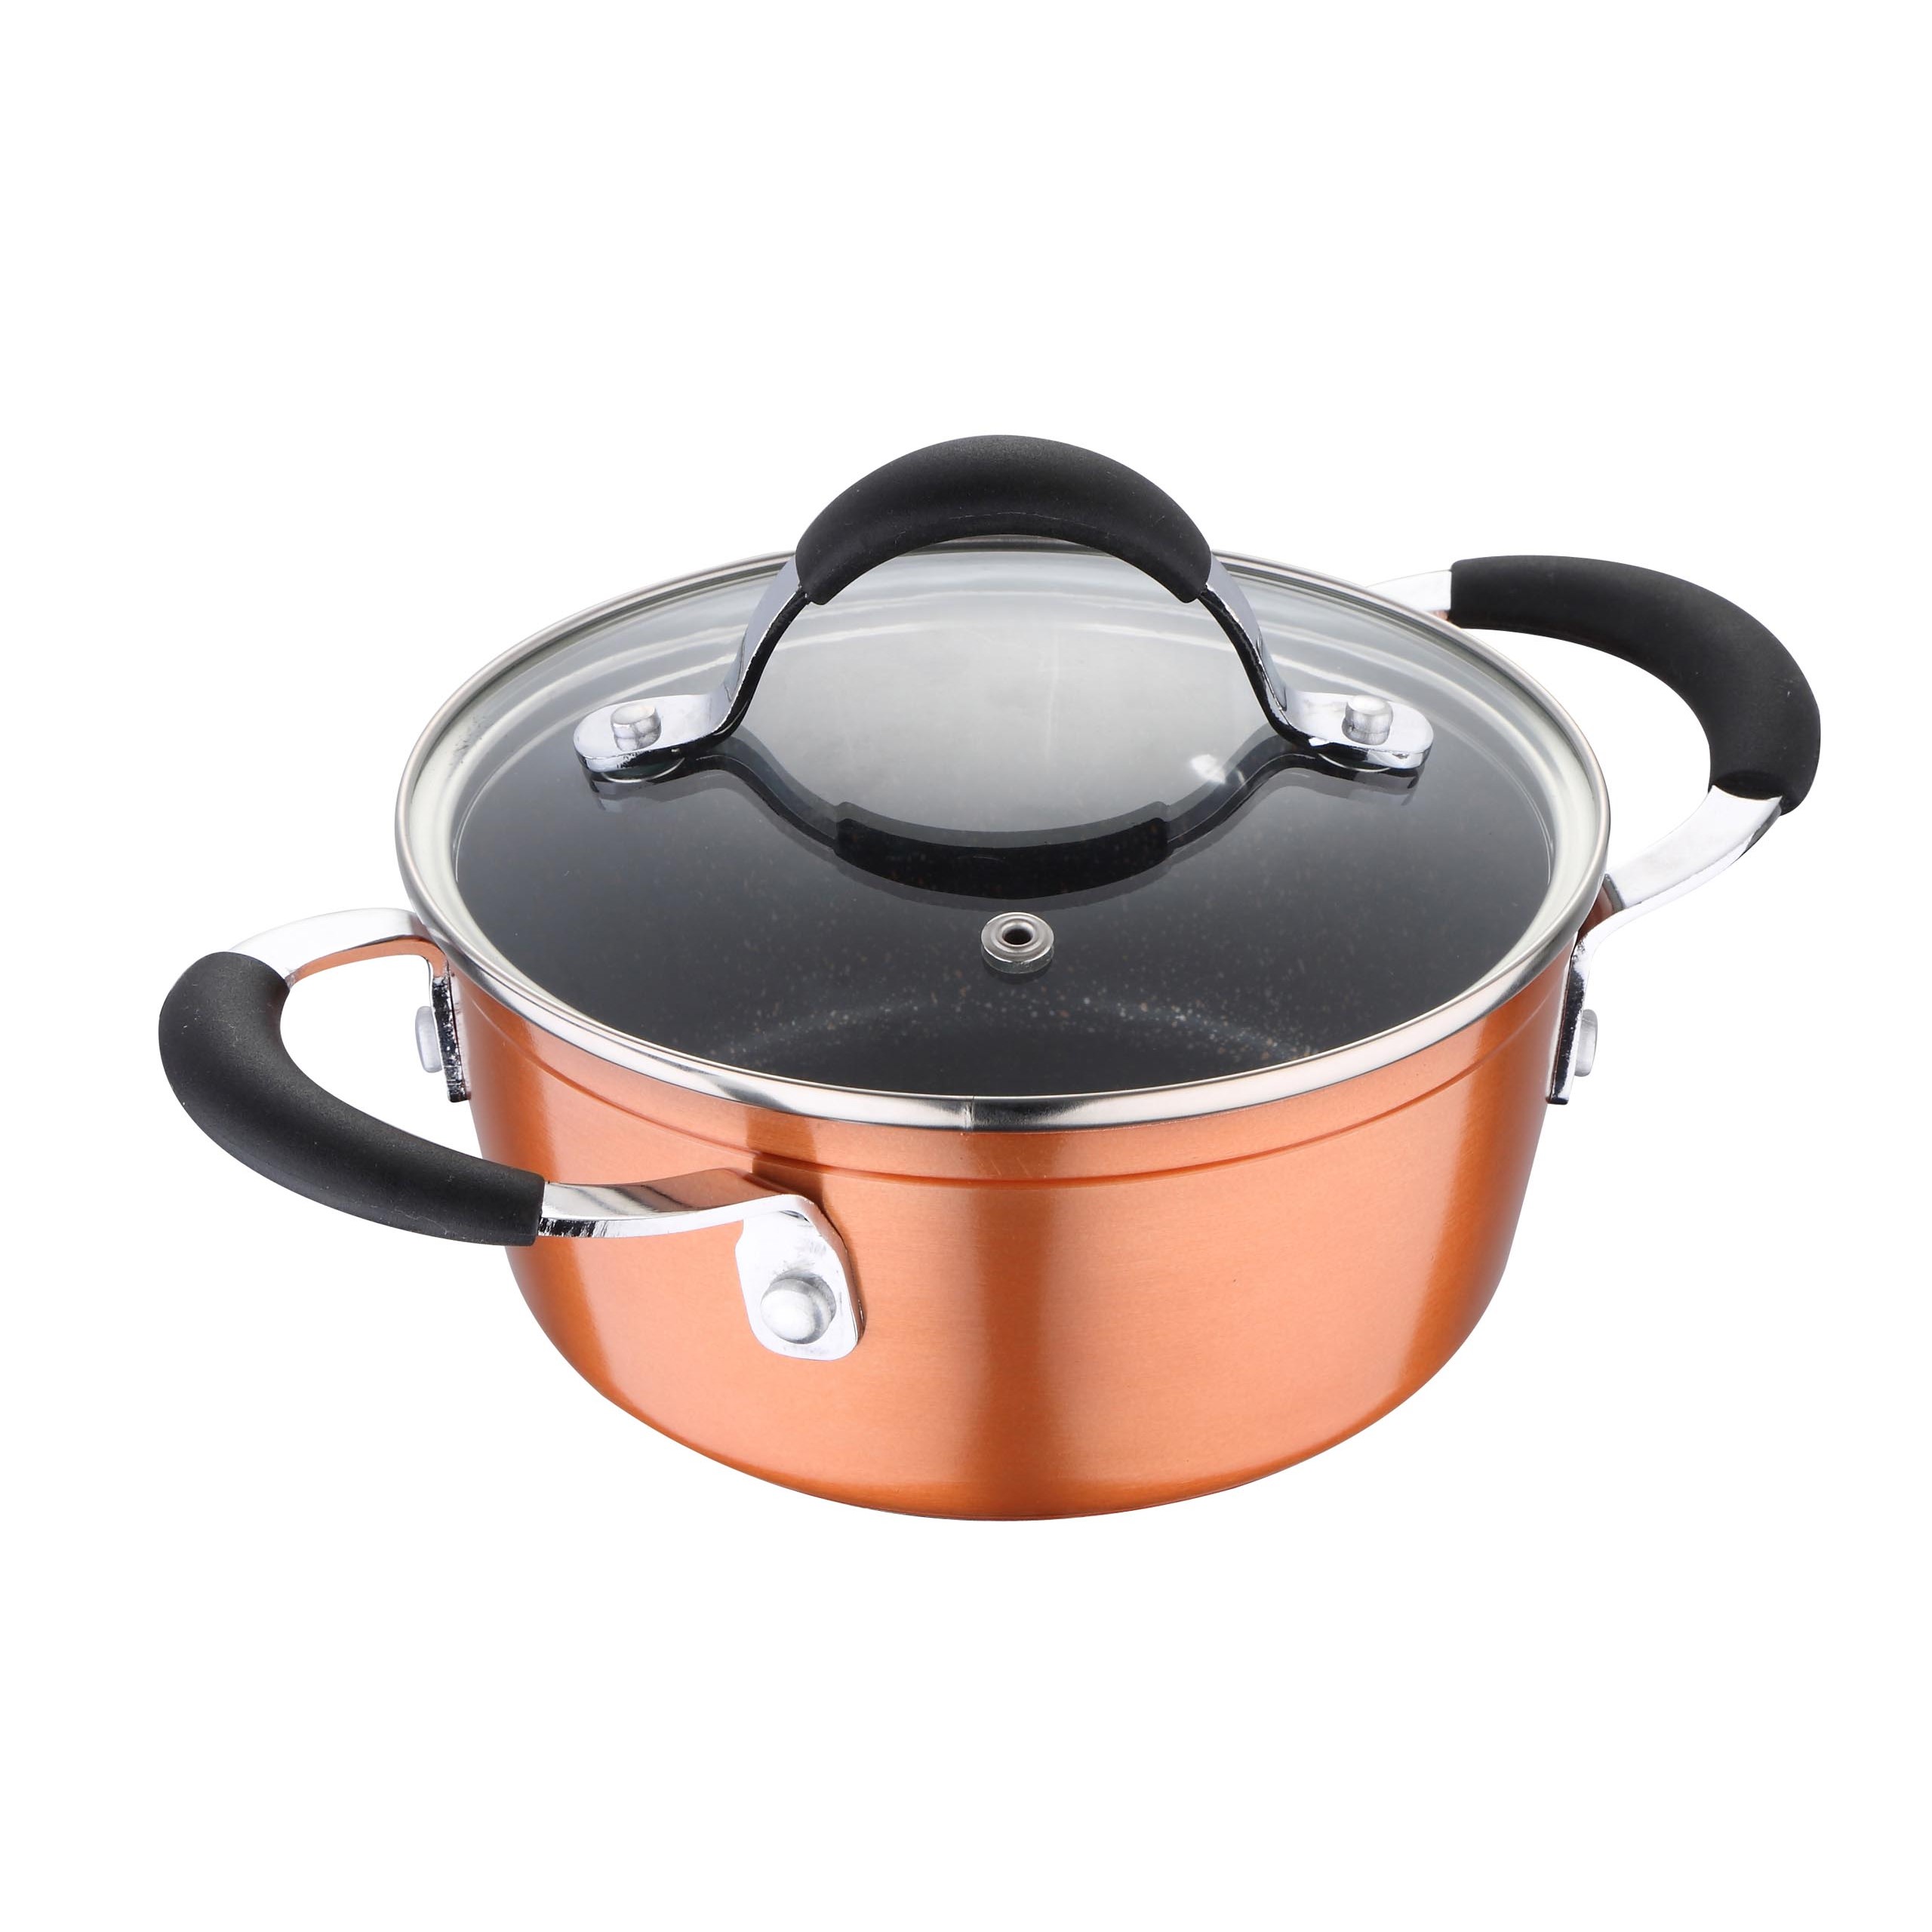 Bergner Non-Stick Casserole with Glass Lid, Copper - 3.9 Ltr